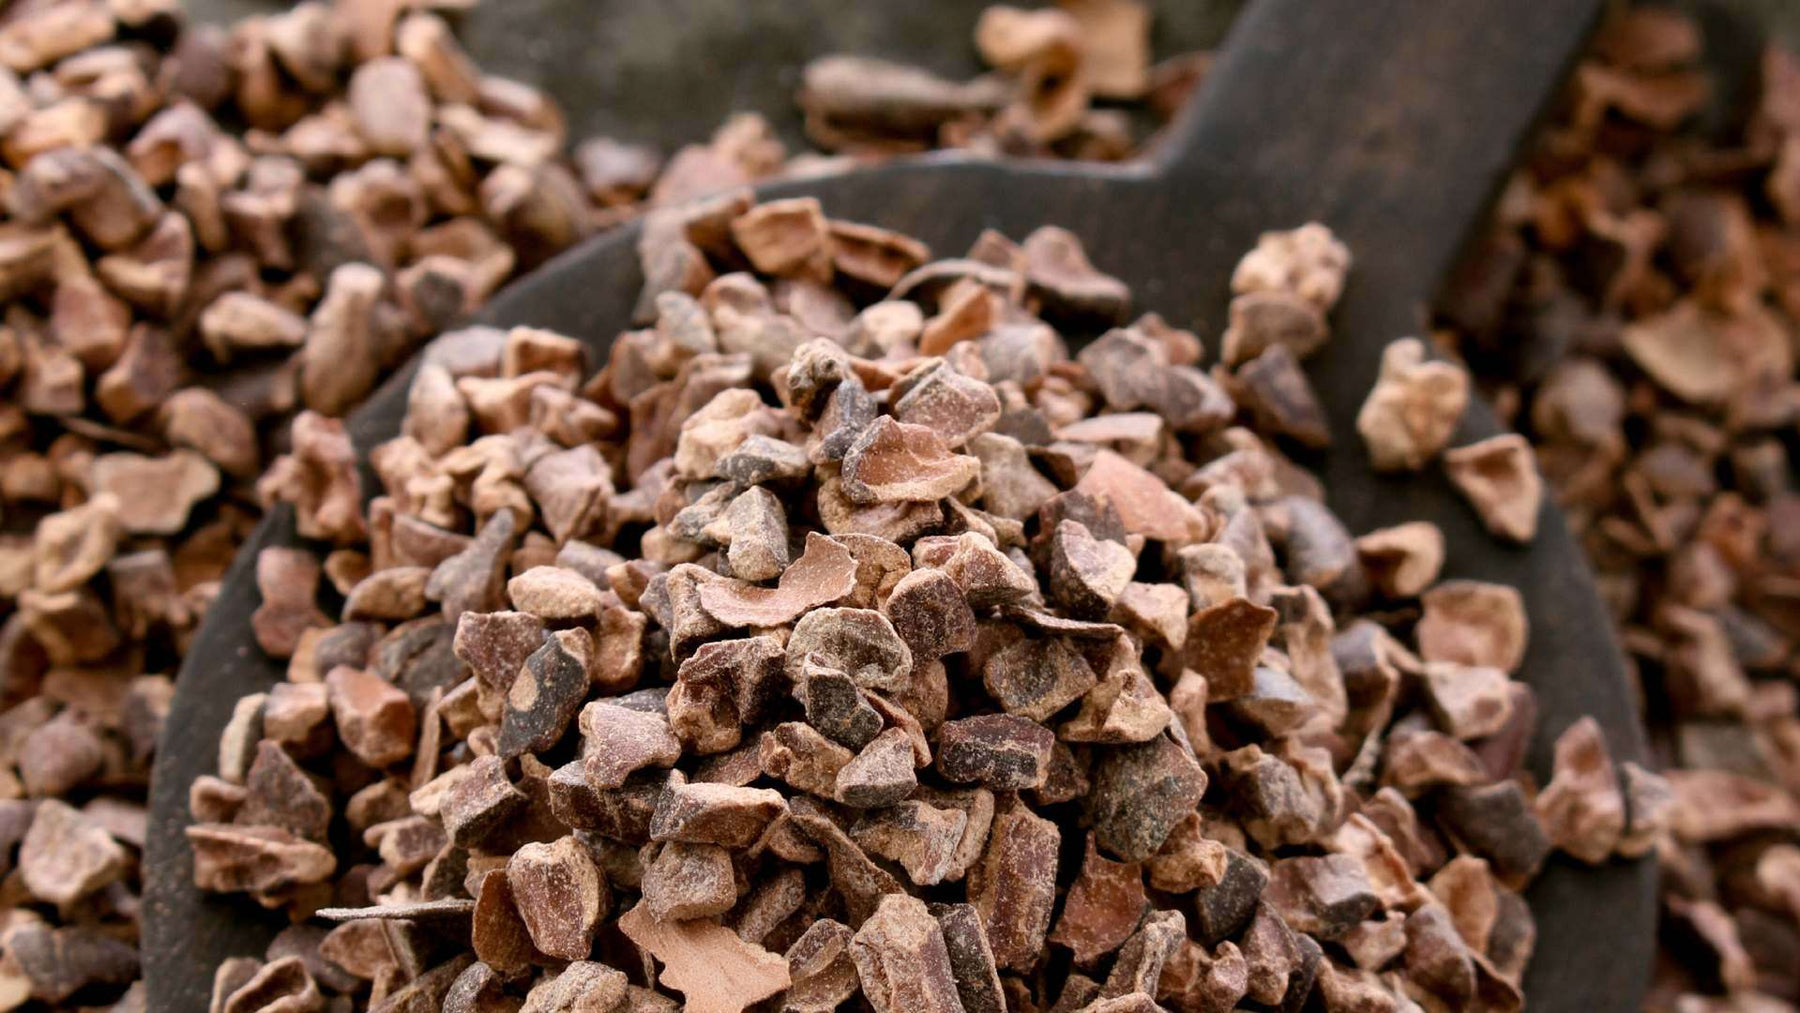 These Cacao Nibs Health Benefits Are Sure to Blow Your Mind